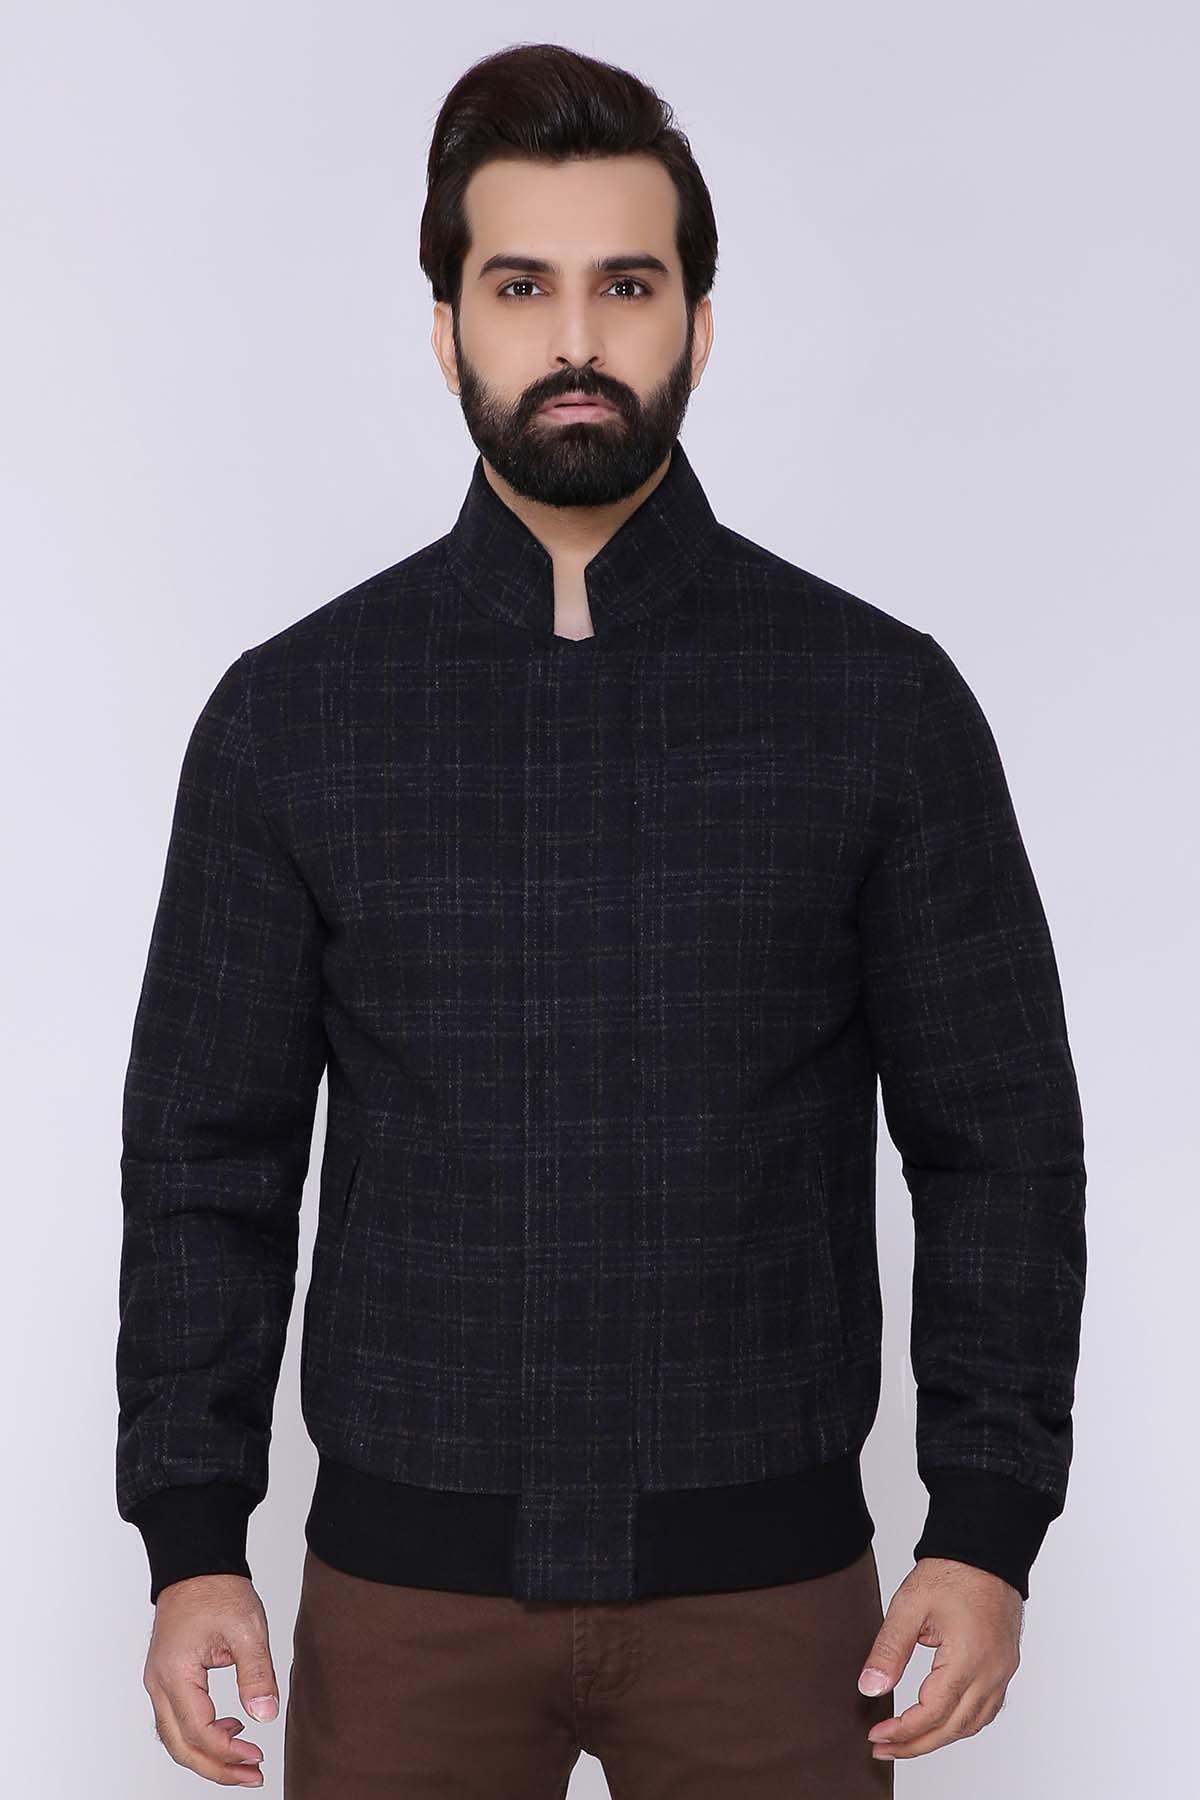 WOOLEN JACKET FULL SLEEVE NAVY at Charcoal Clothing